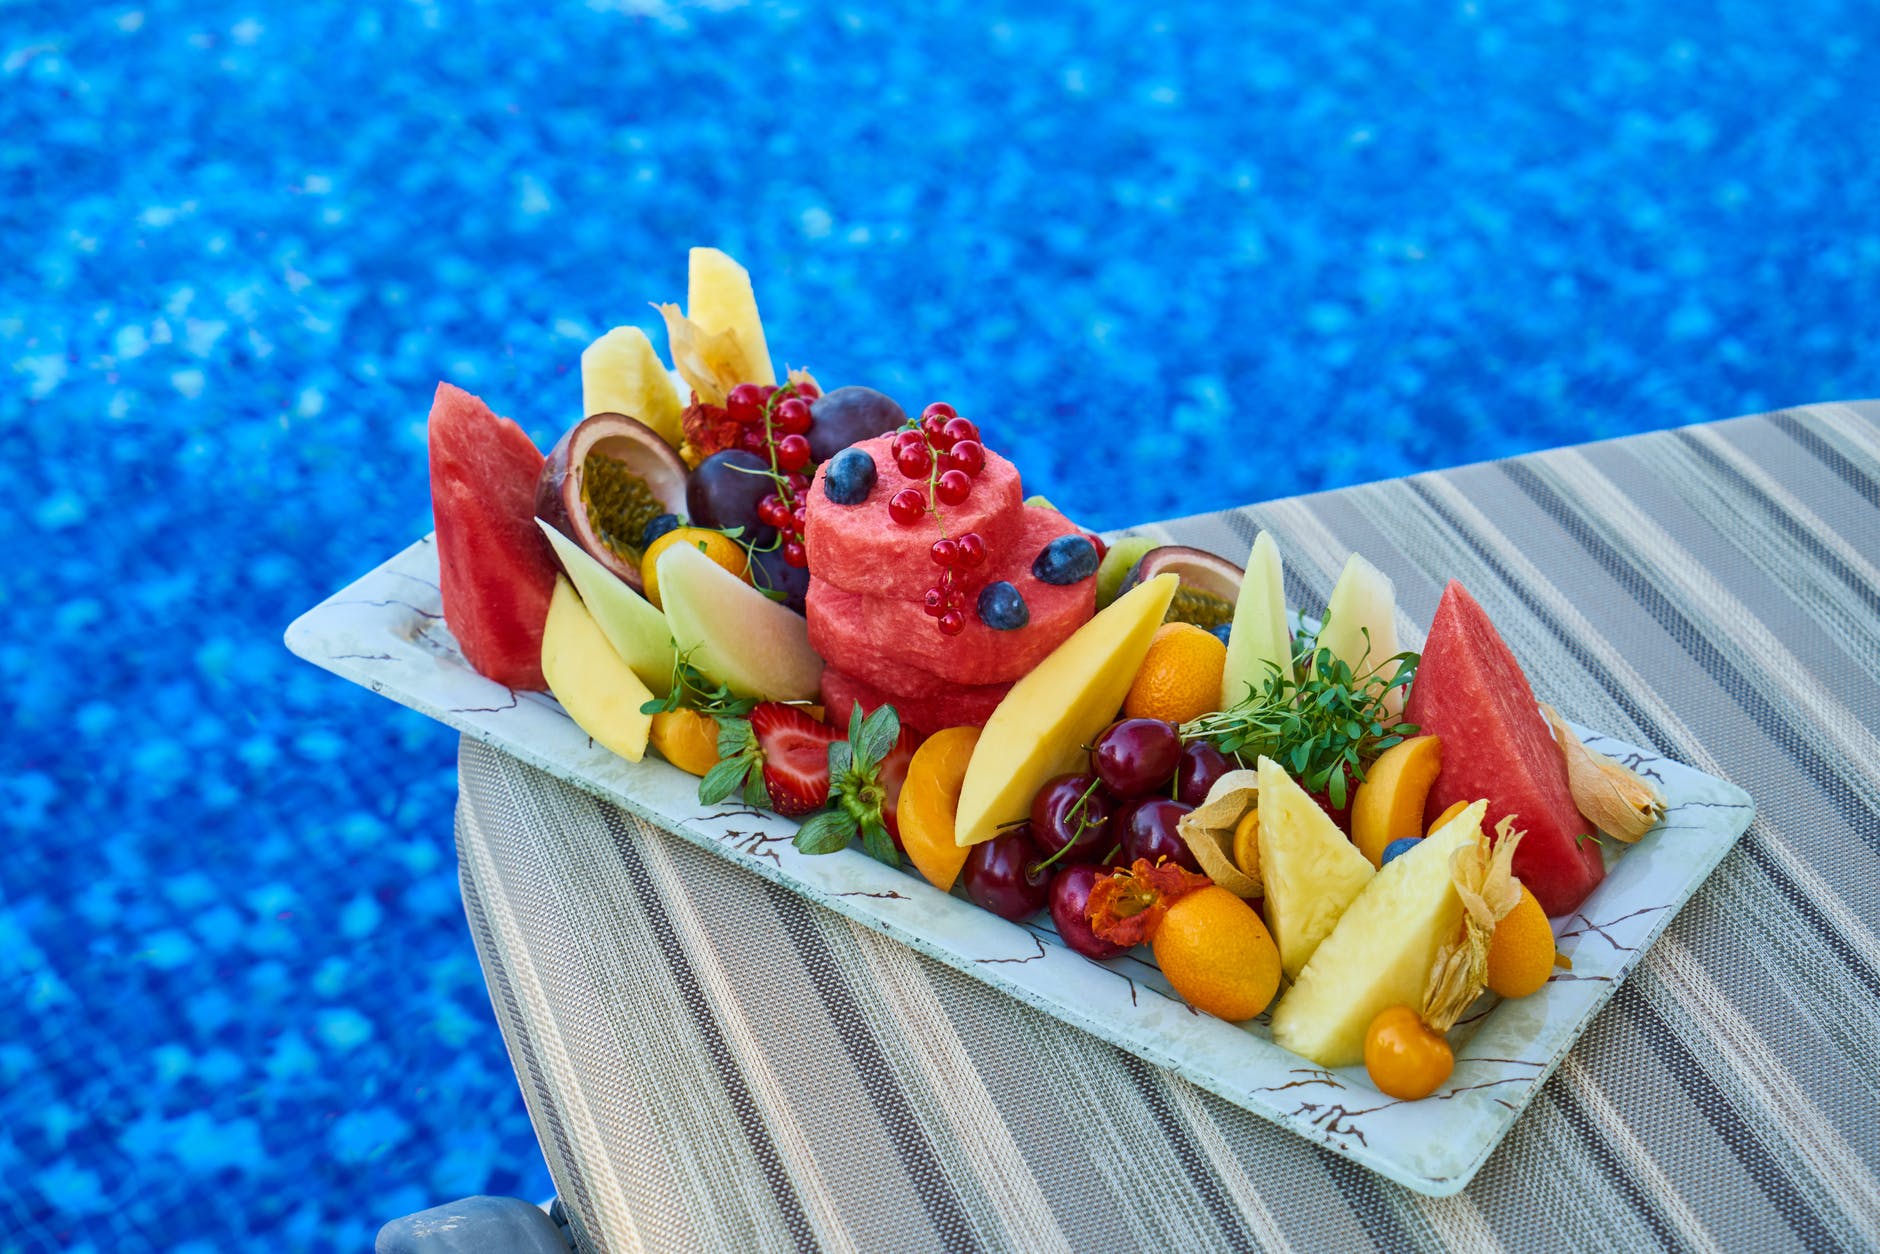 A tray with different fruit on it.